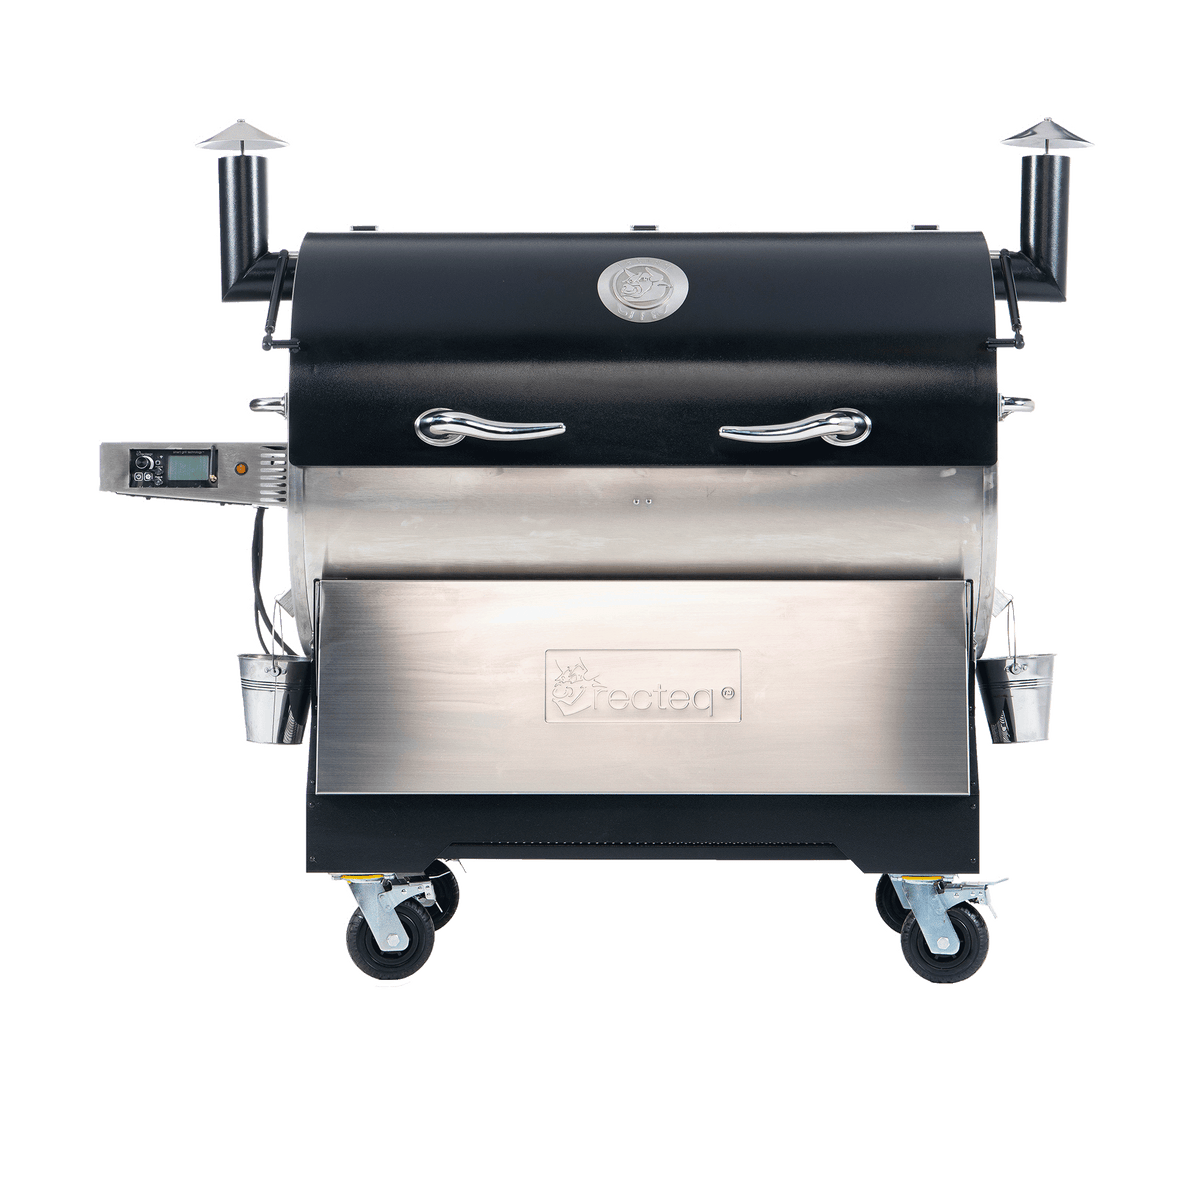 RECTEQ Bull RT-700 Pellet Grill Review - Learn to Smoke Meat with